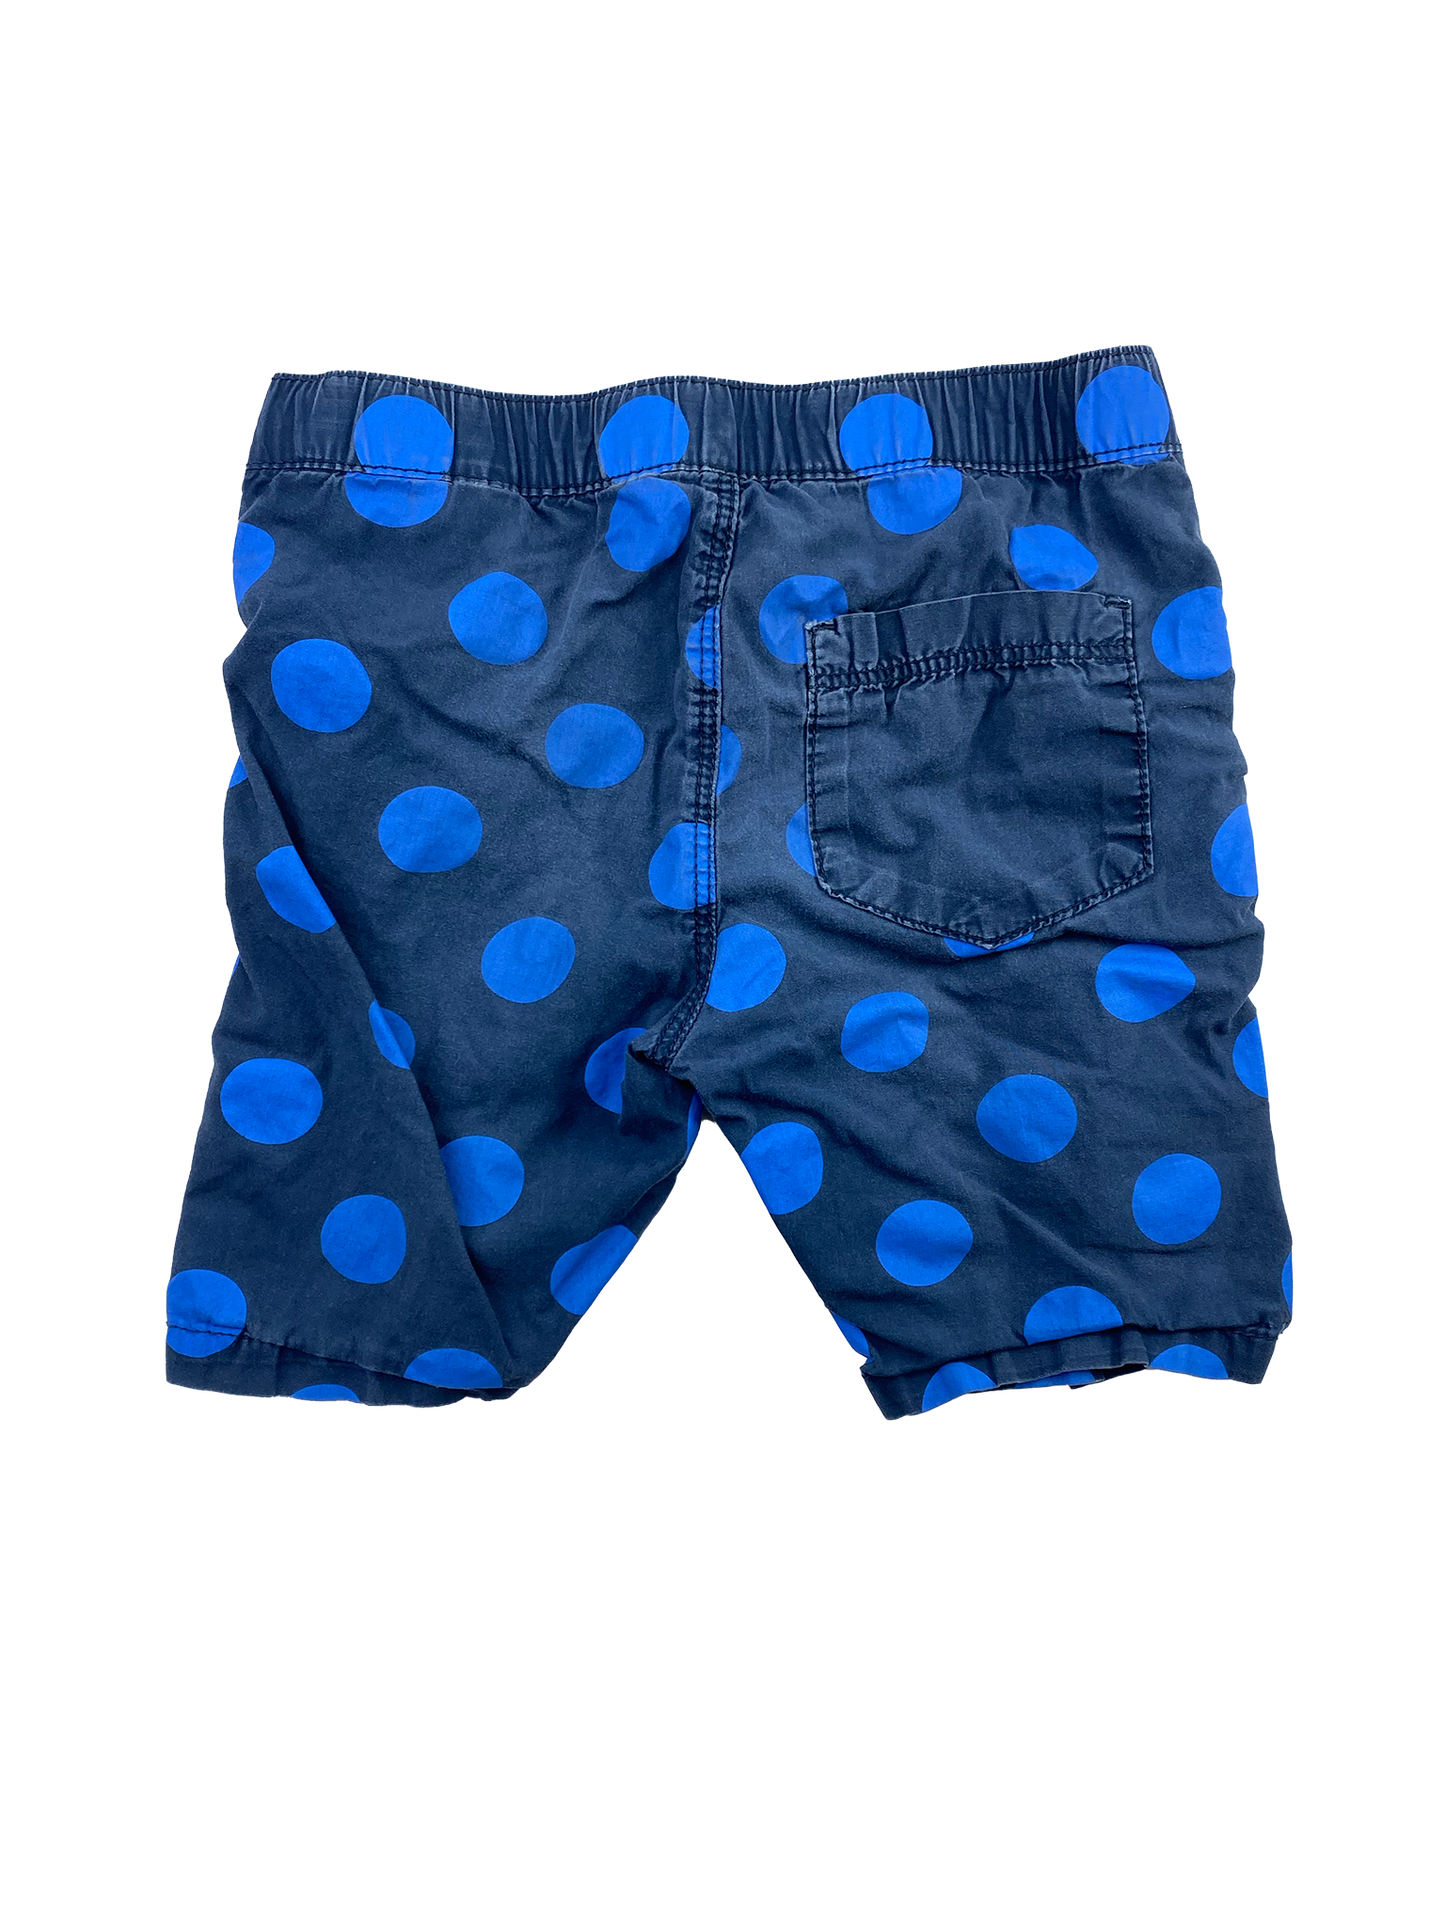 H&M Navy Shorts with Blue Dots 4-5